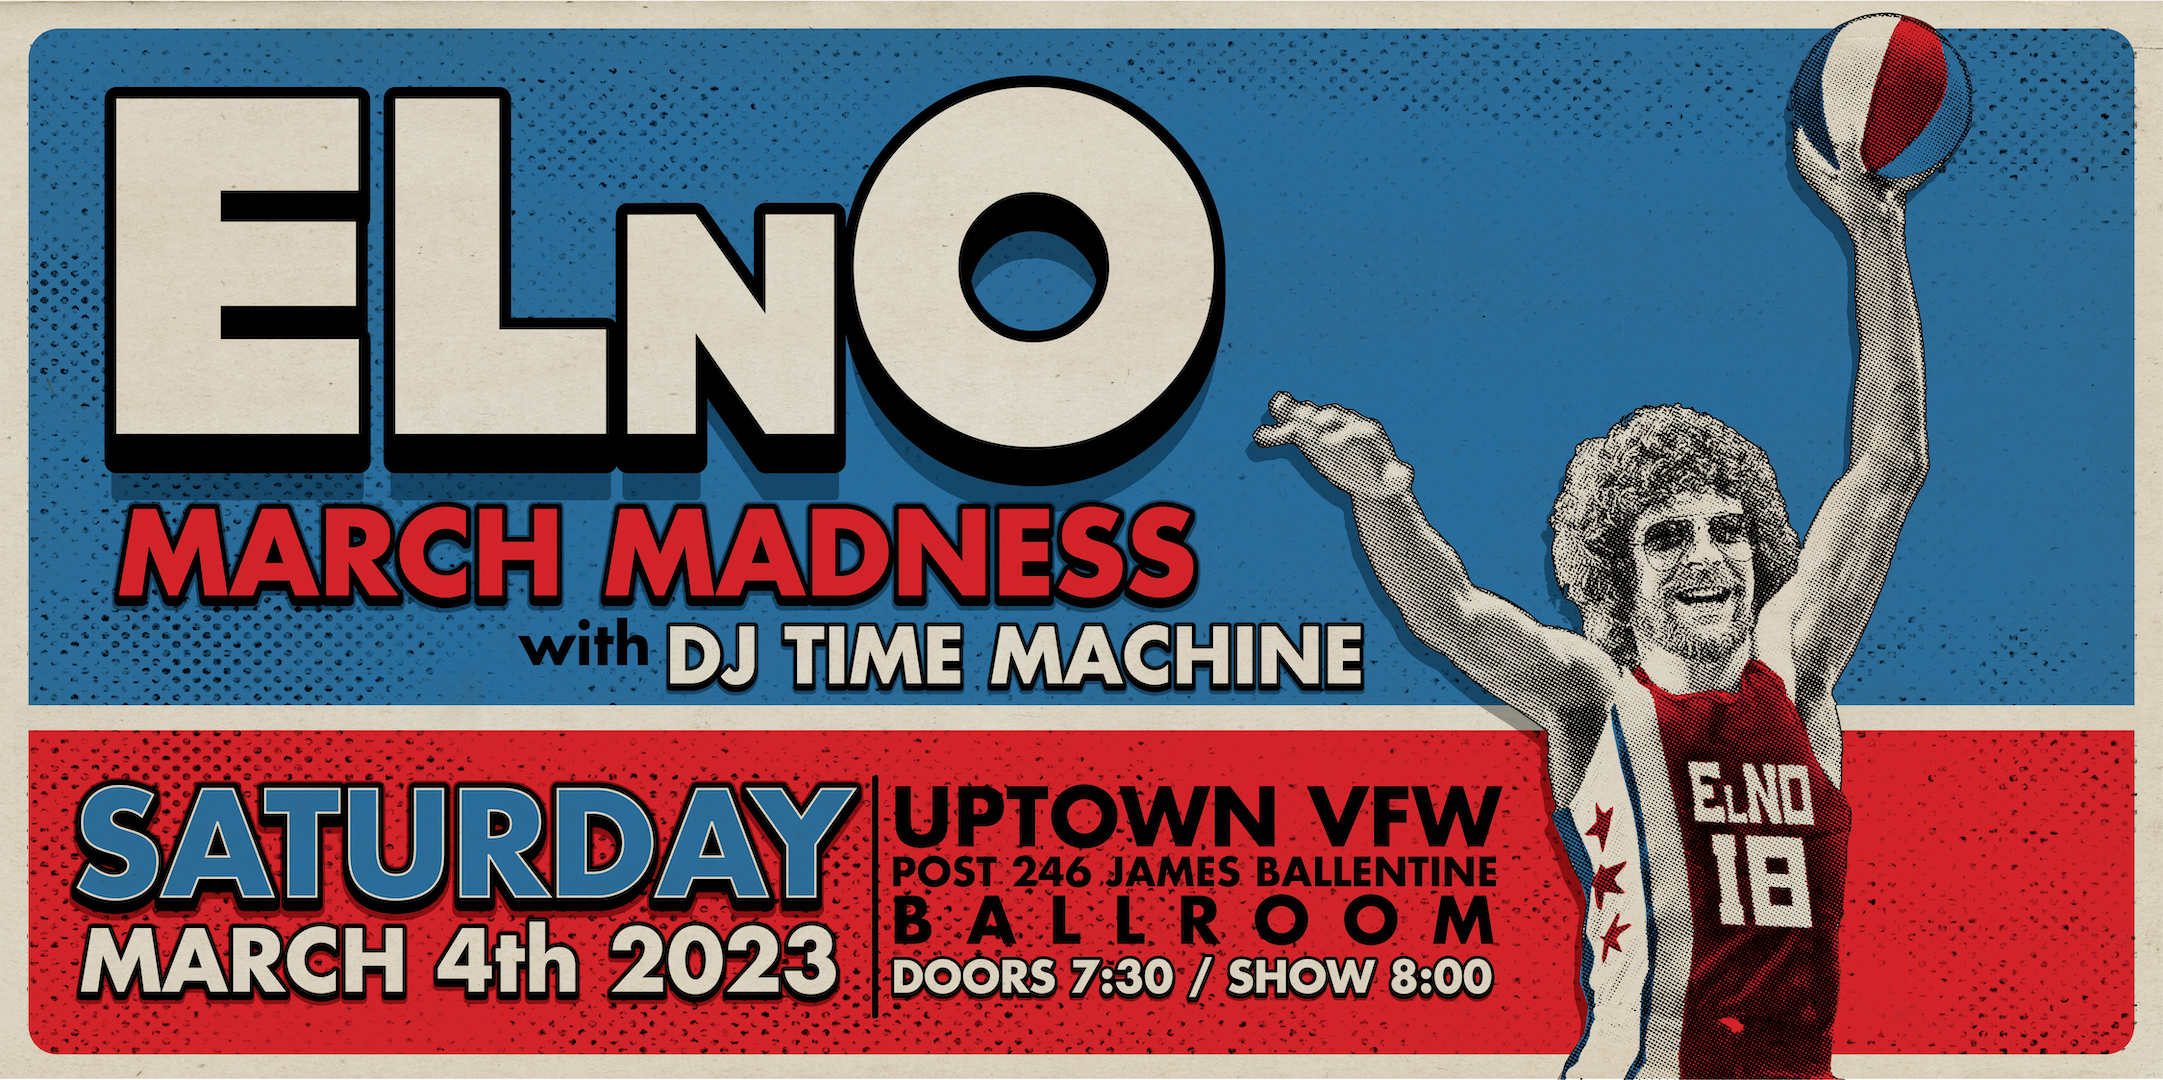 ELnO MARCH MADNESS with DJ Time Machine Saturday March 4 James Ballentine "Uptown" VFW Post 246 Doors 7:30pm :: Music 8:00pm :: 21+ GA $25 ADV / $30 DOS NO REFUNDS